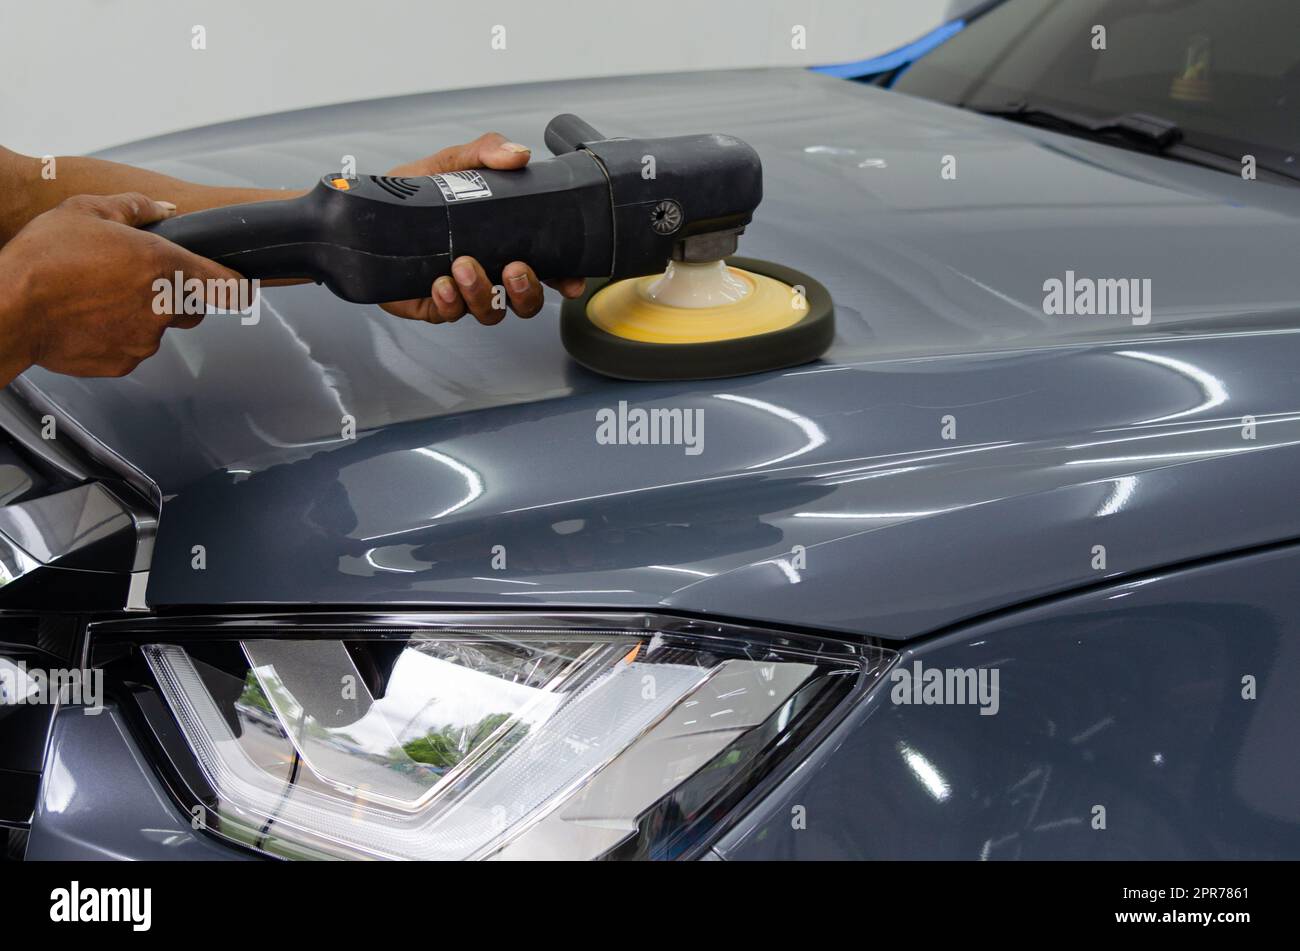 Detailing car Cut Out Stock Images & Pictures - Page 2 - Alamy